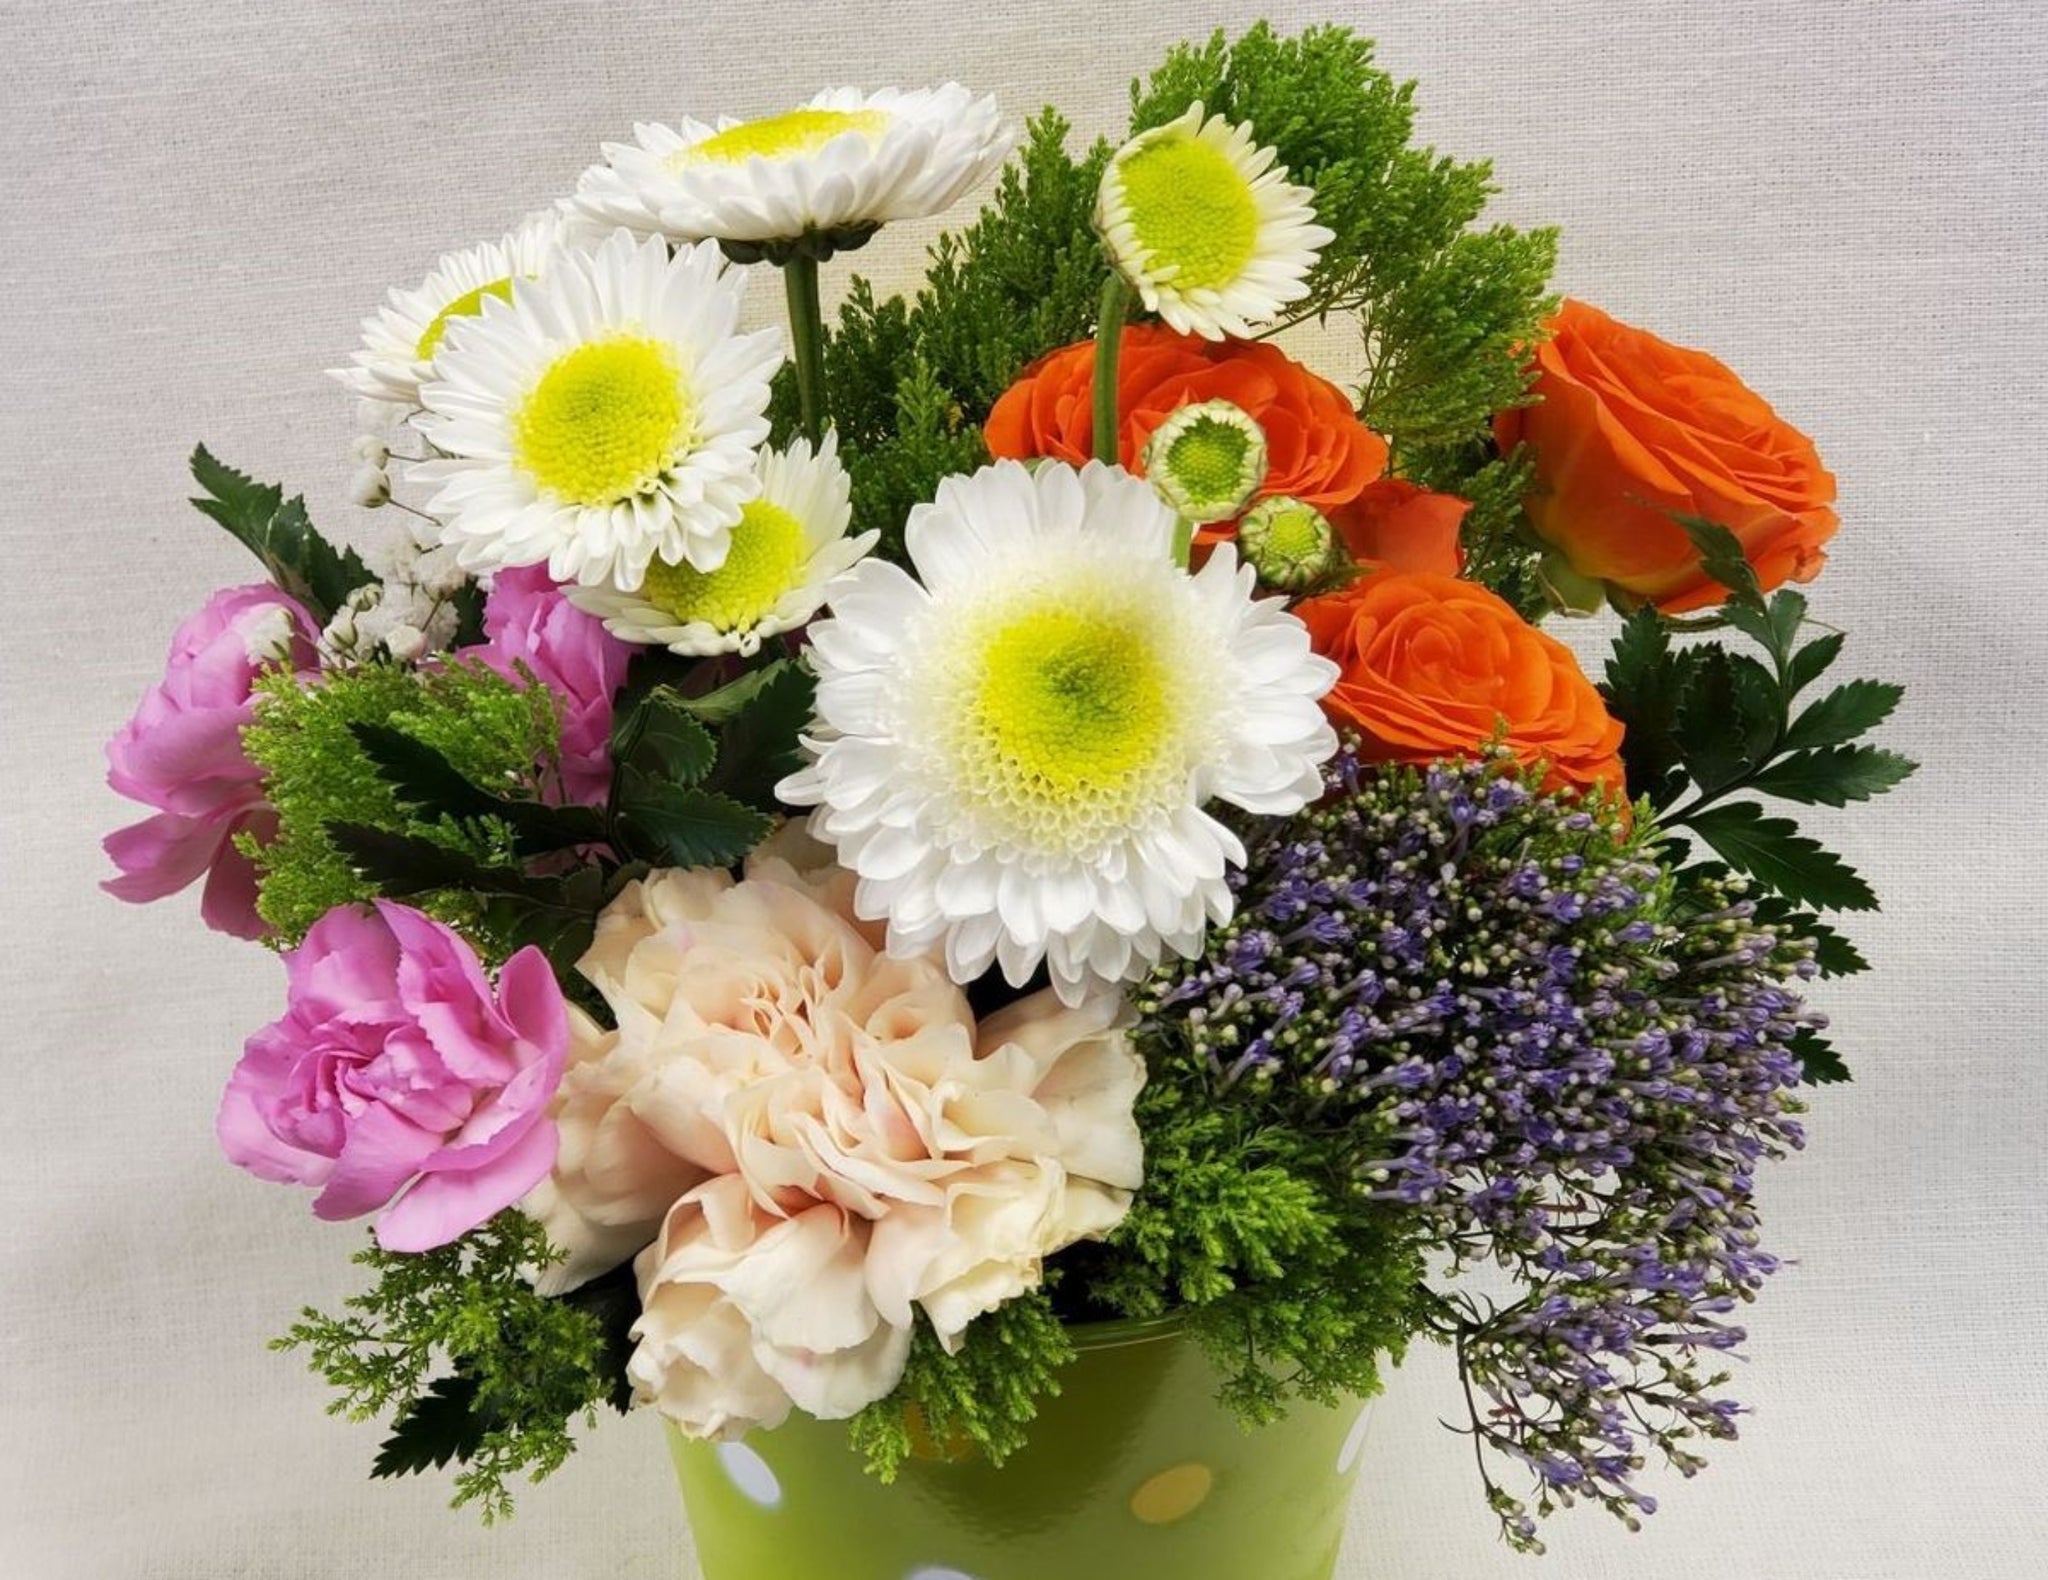 Daisy Bouquets - Set of Cemetery Vases with Artificial Daisy